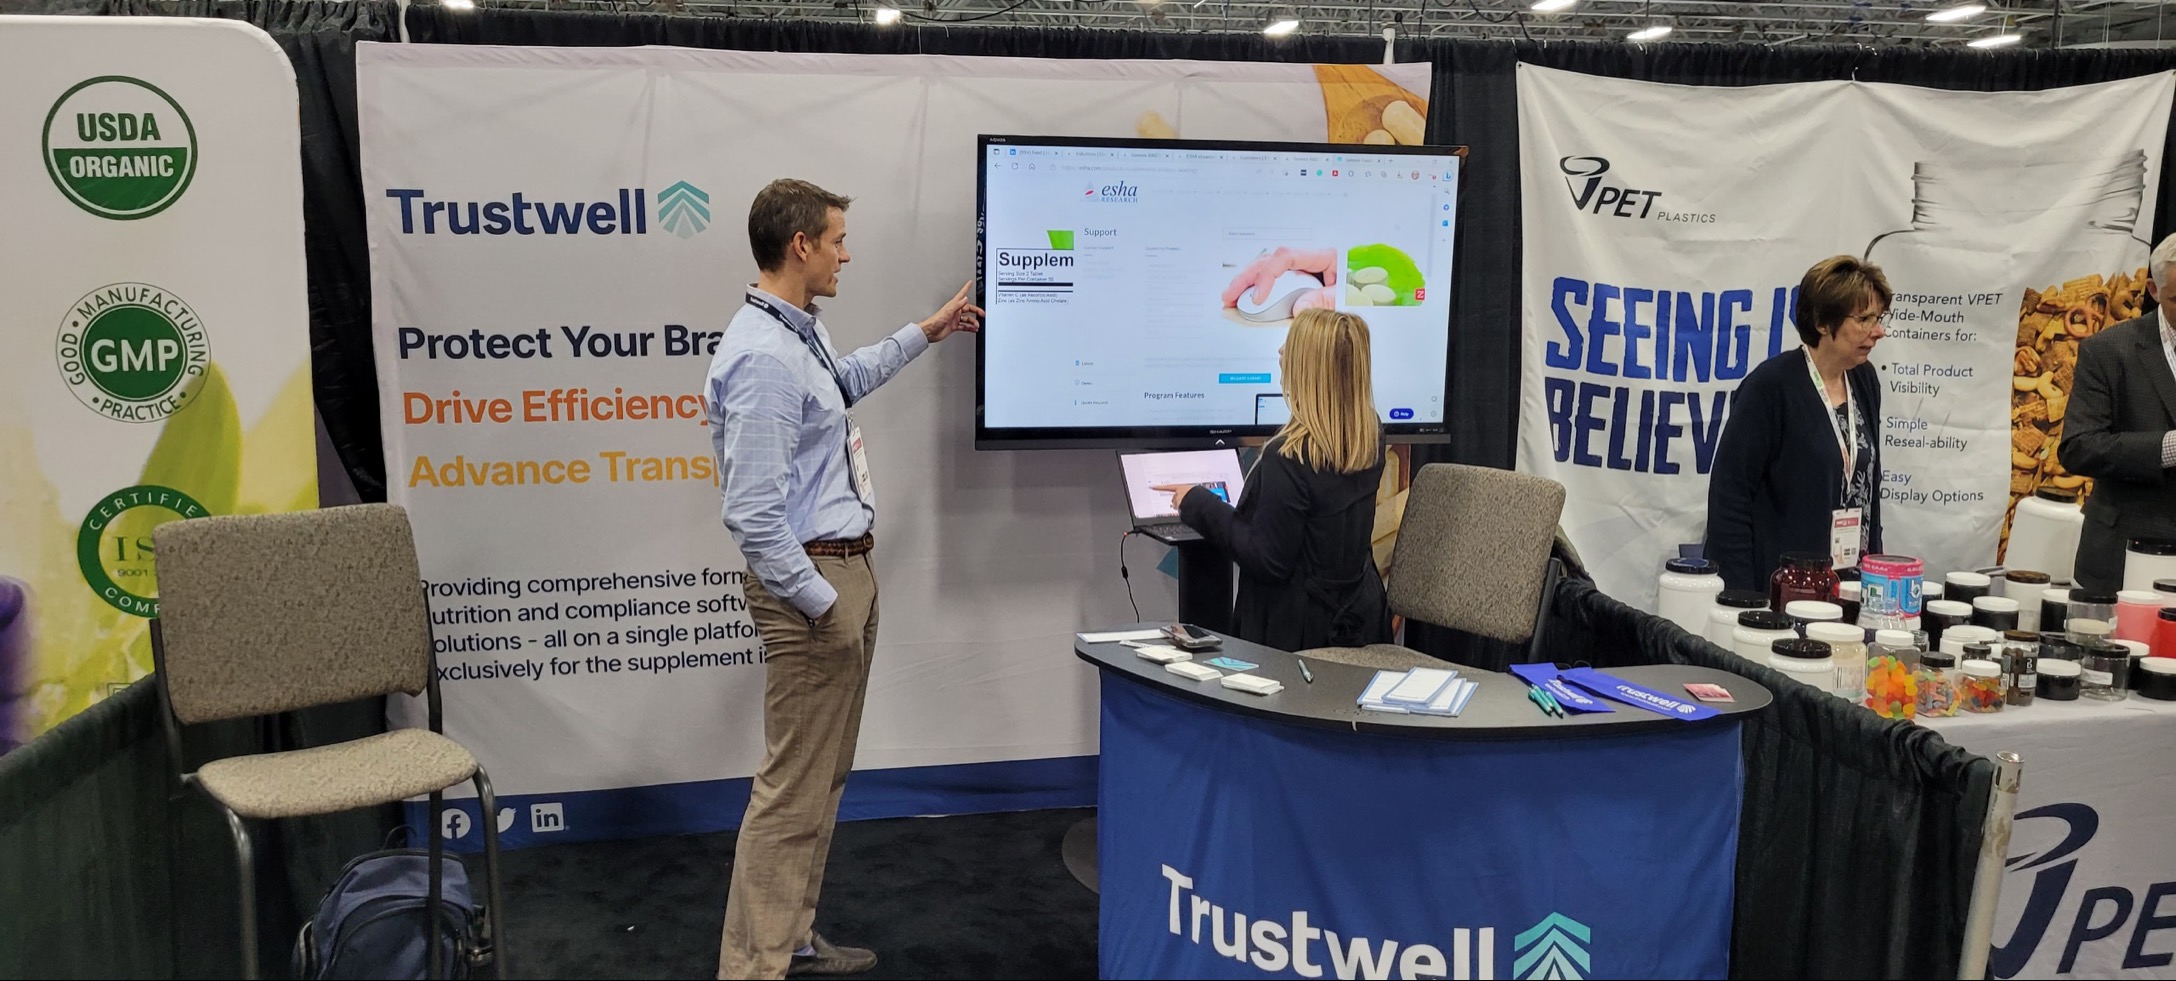 Find Trustwell at GS1 Connect: Booth #21 and More!